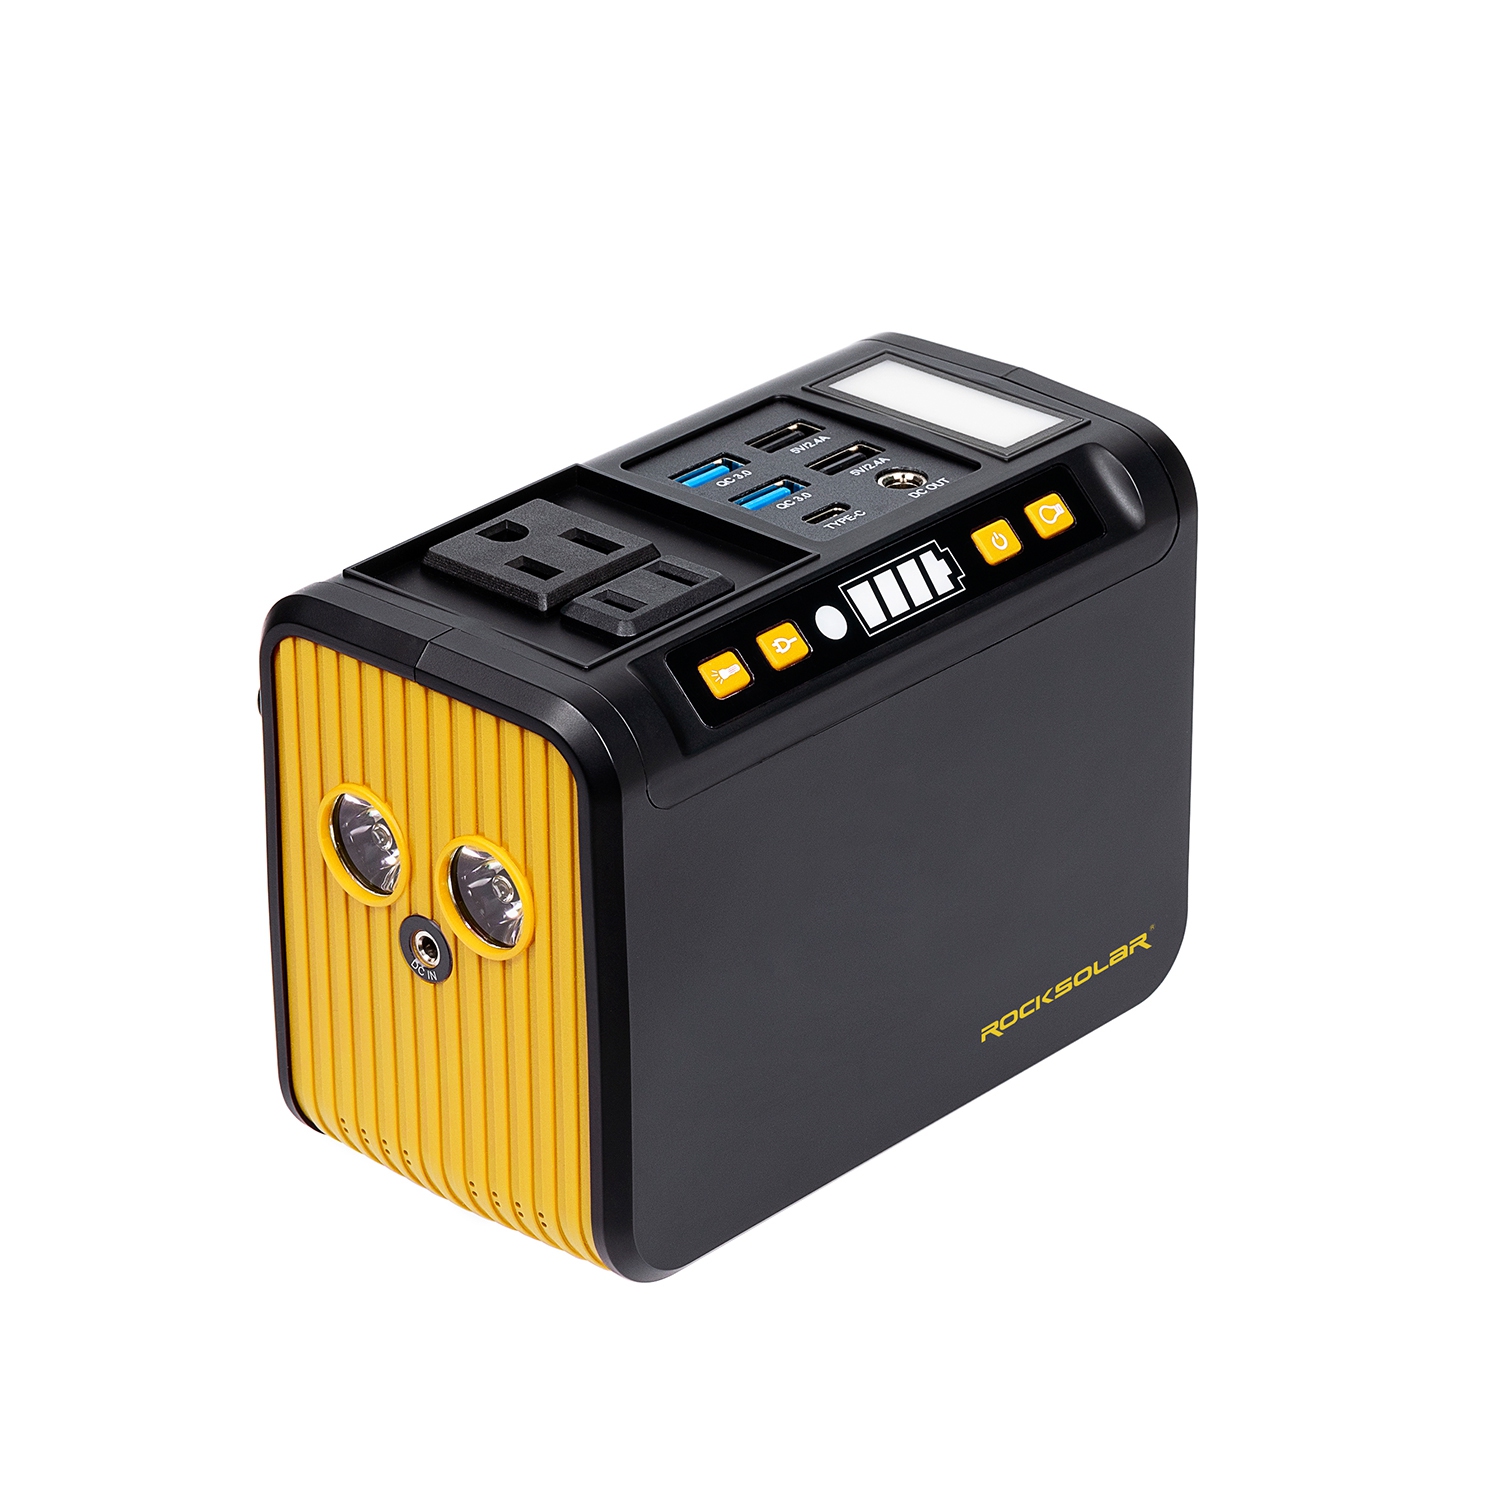 Refurbished(Excellent) Portable Power Station 80W Weekender RS81 - 88Wh Backup Lithium Battery, Solar Generator with AC/USB/12V DC Outlets for Camping, Emergency, Outdoor.